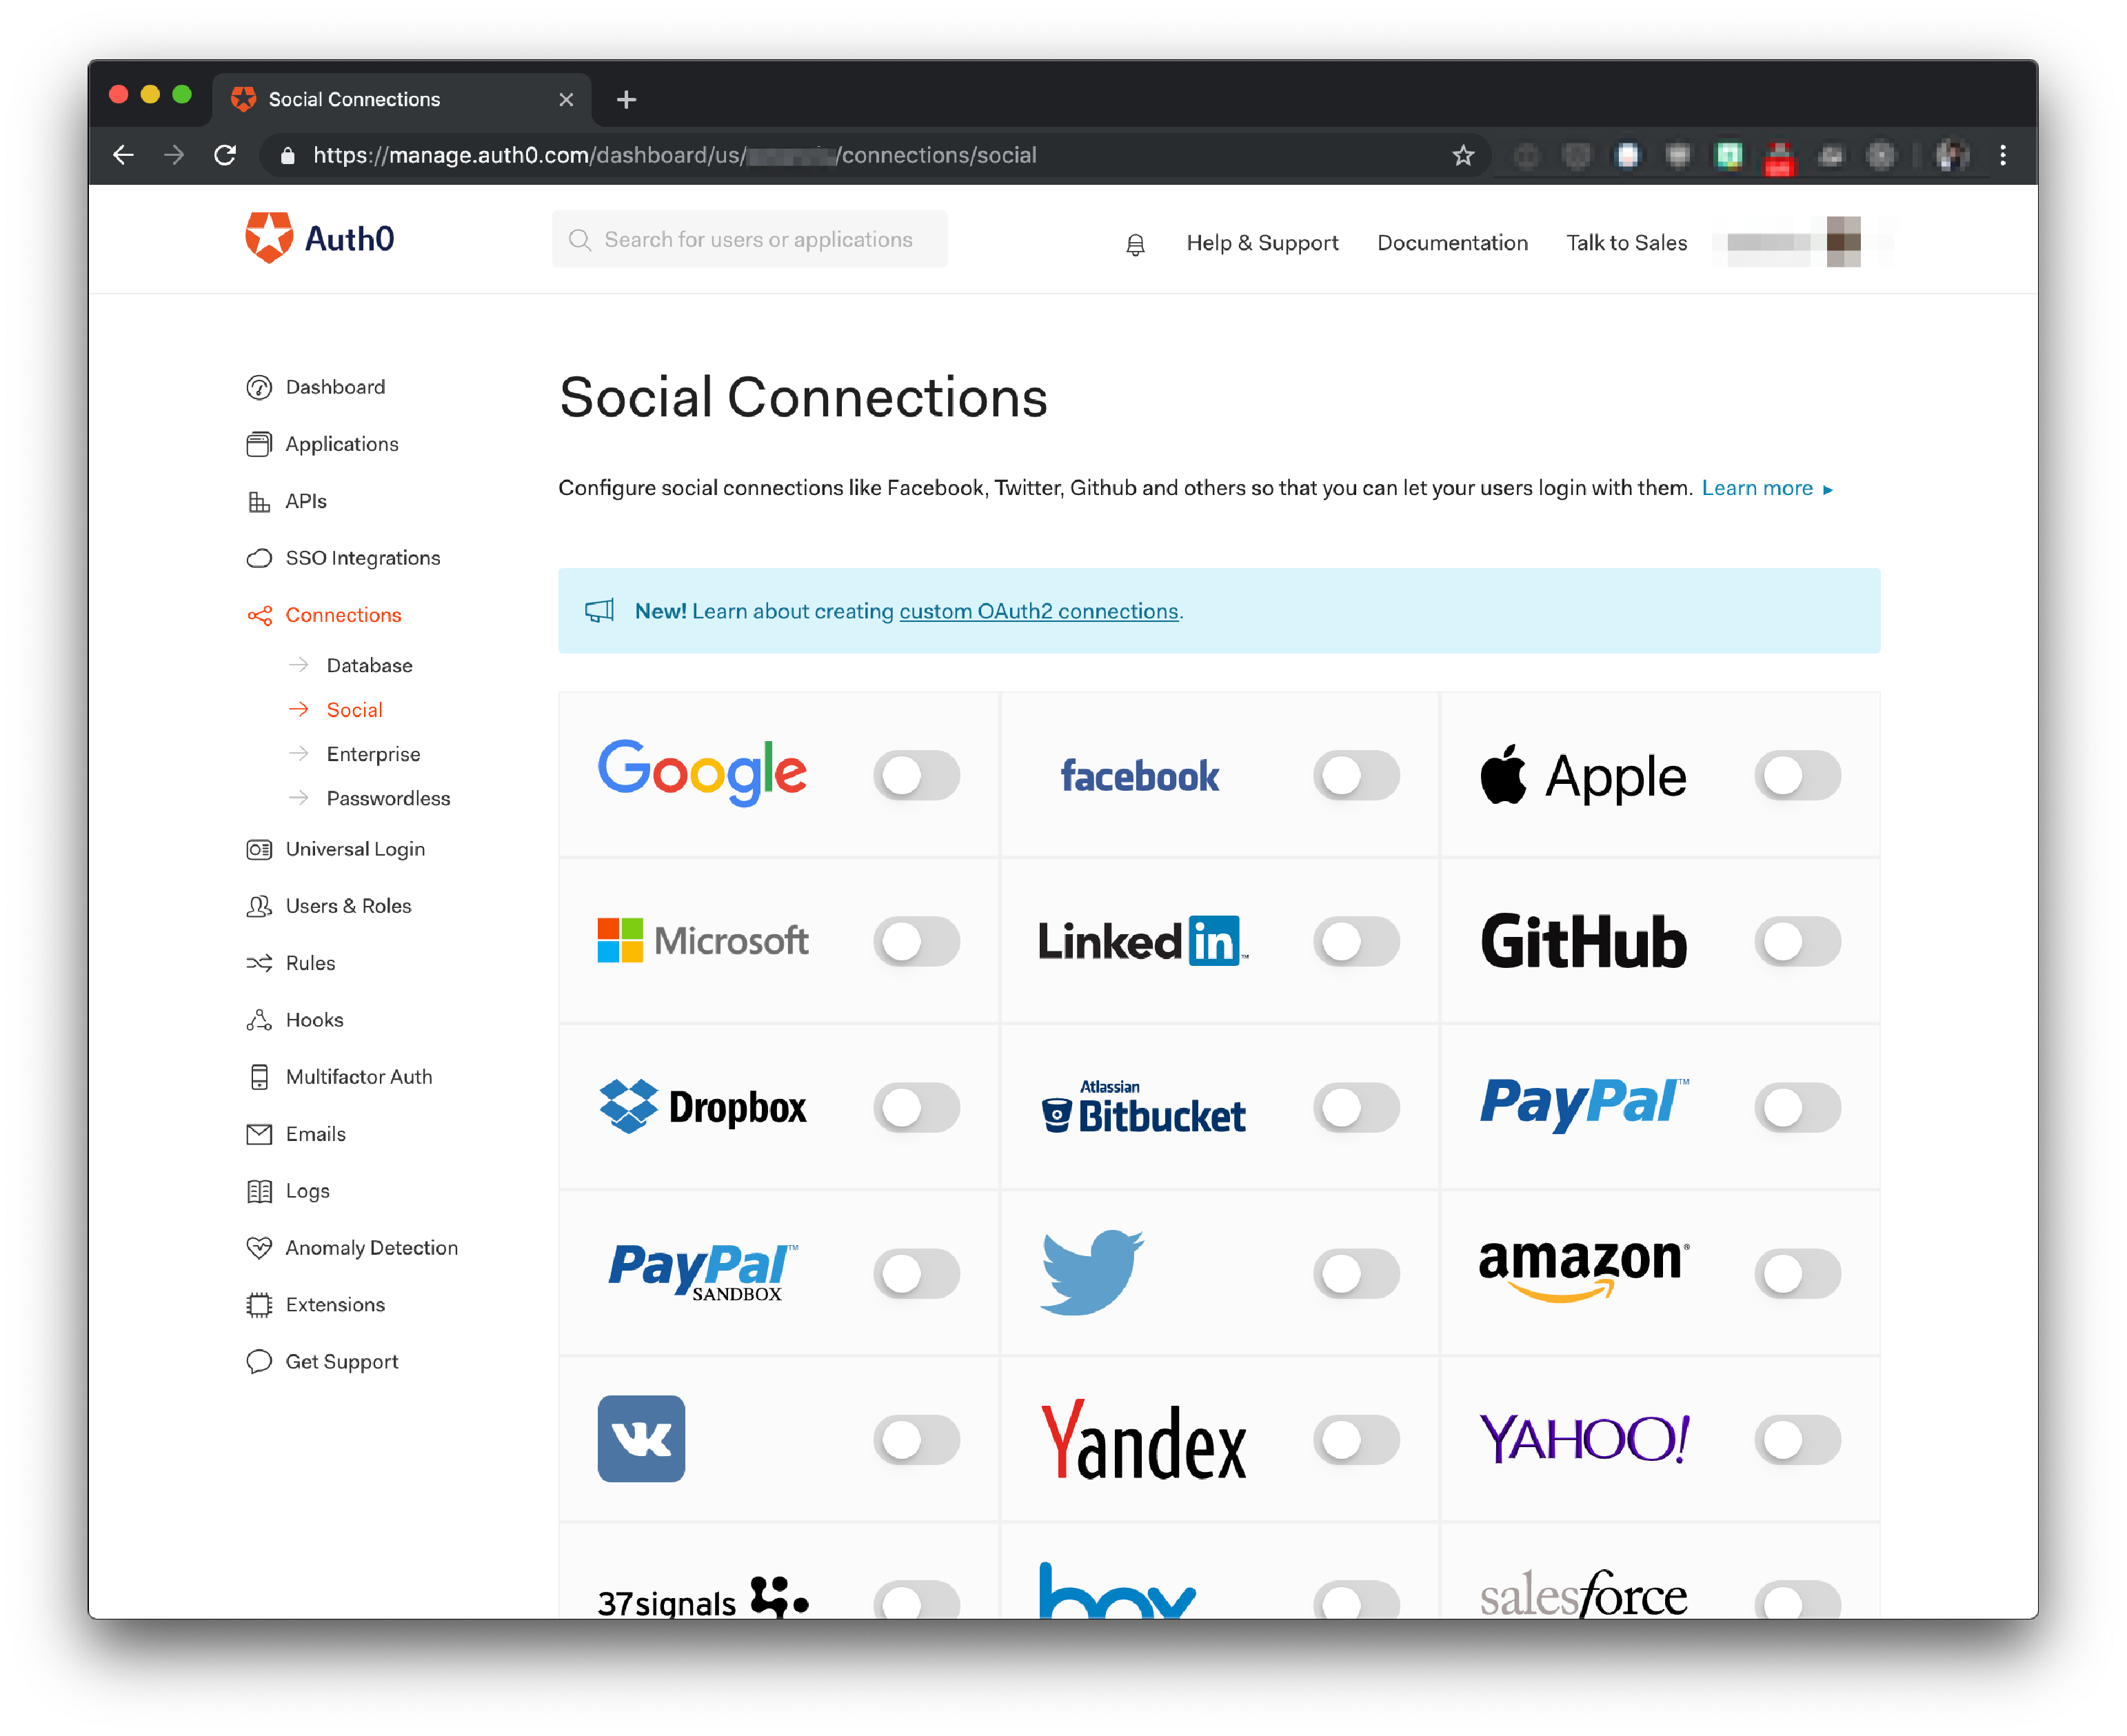 Auth0 Dashboard - Social Connections with Sign In with Apple included